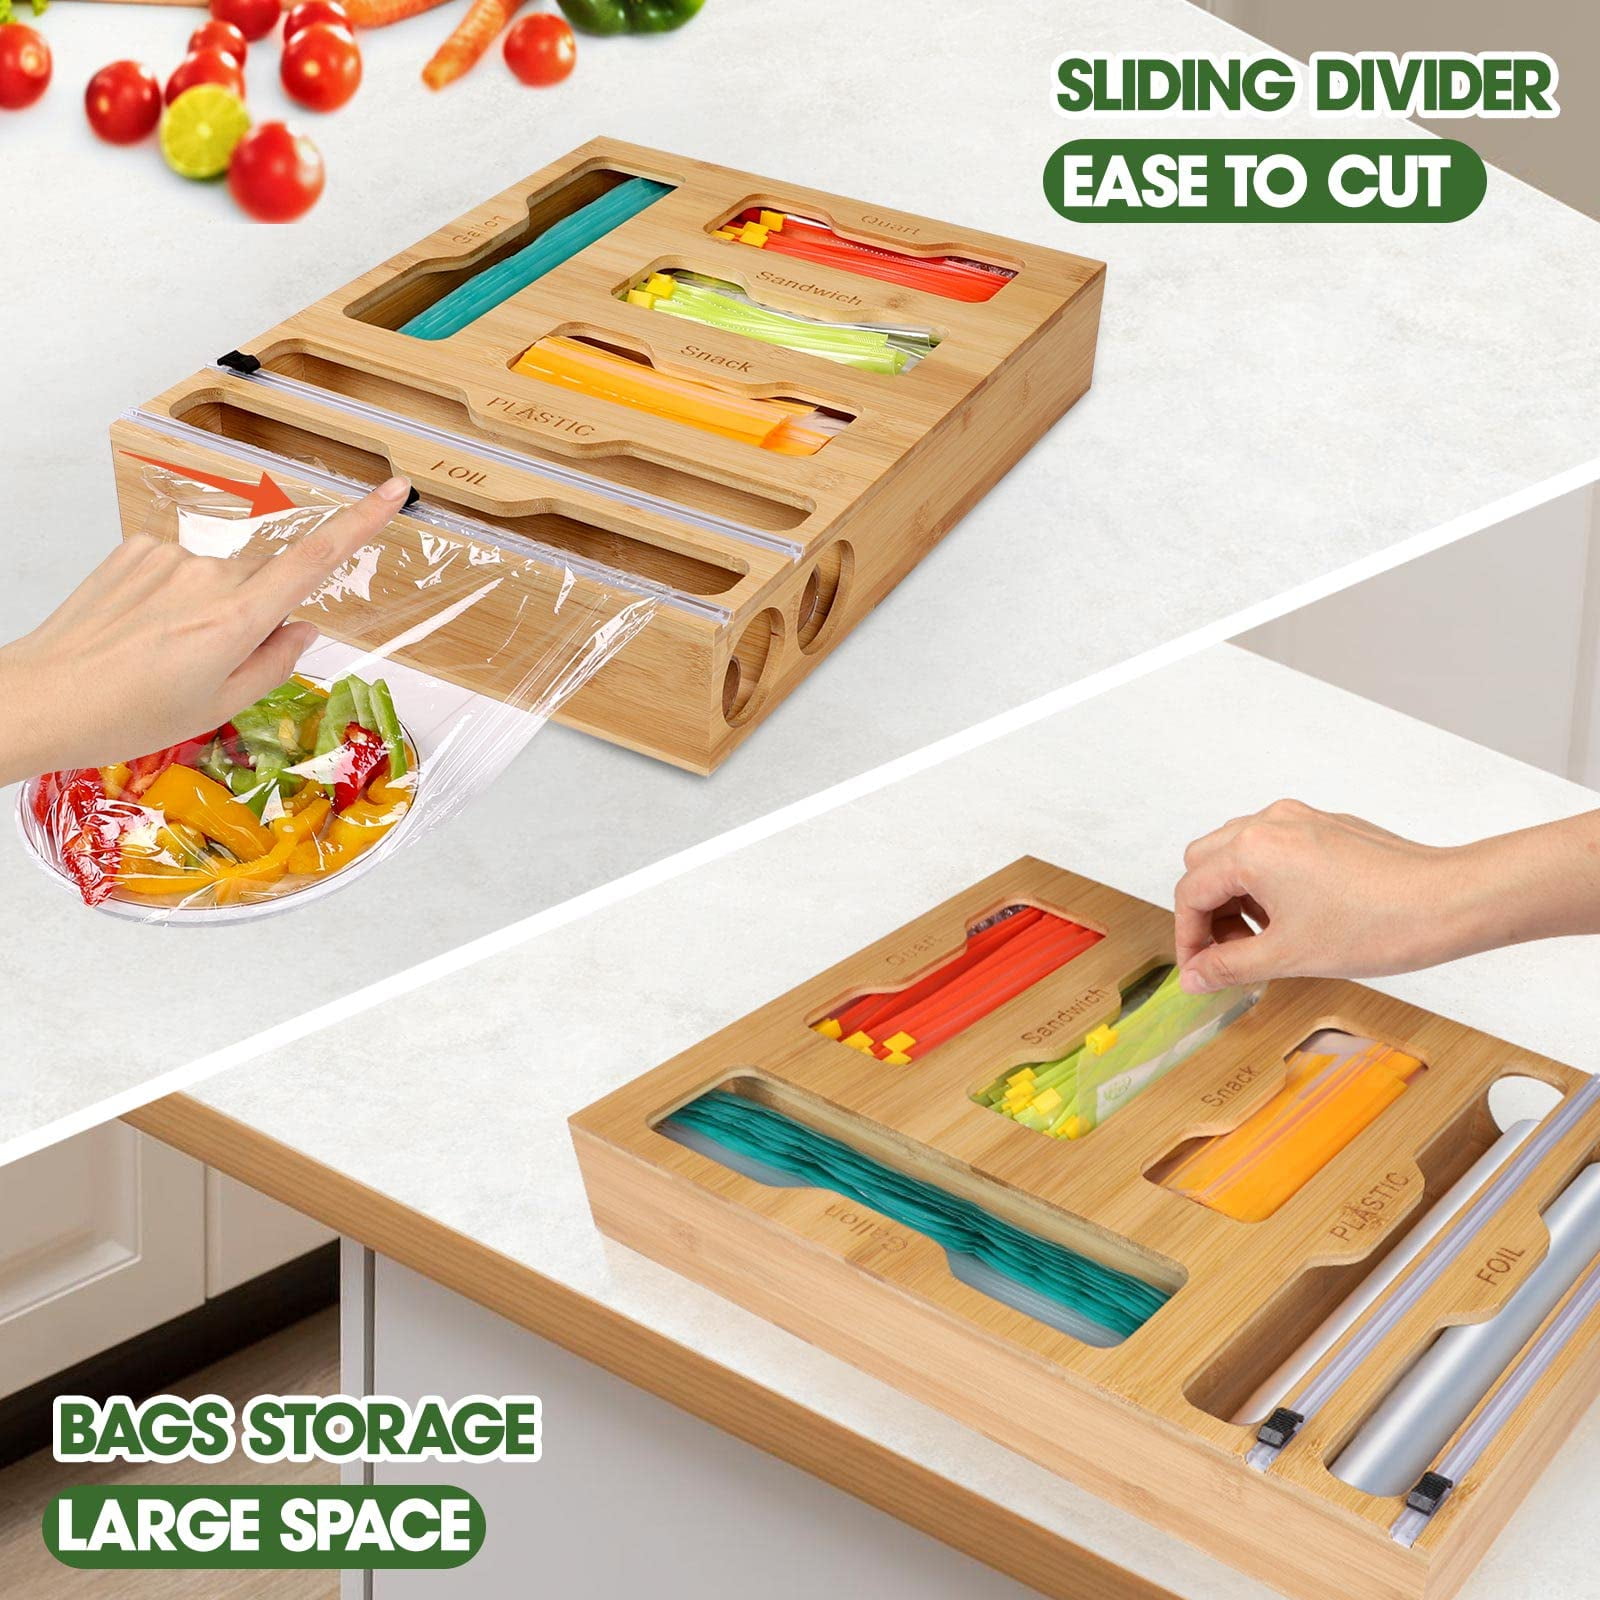 AGILILY 9 IN 1 Bamboo Storage Bag Organizer - Plastic Wrap Dispenser with  Cutter - Kitchen Organizers and Storage for Ziplock Bags, Gallon, Quart